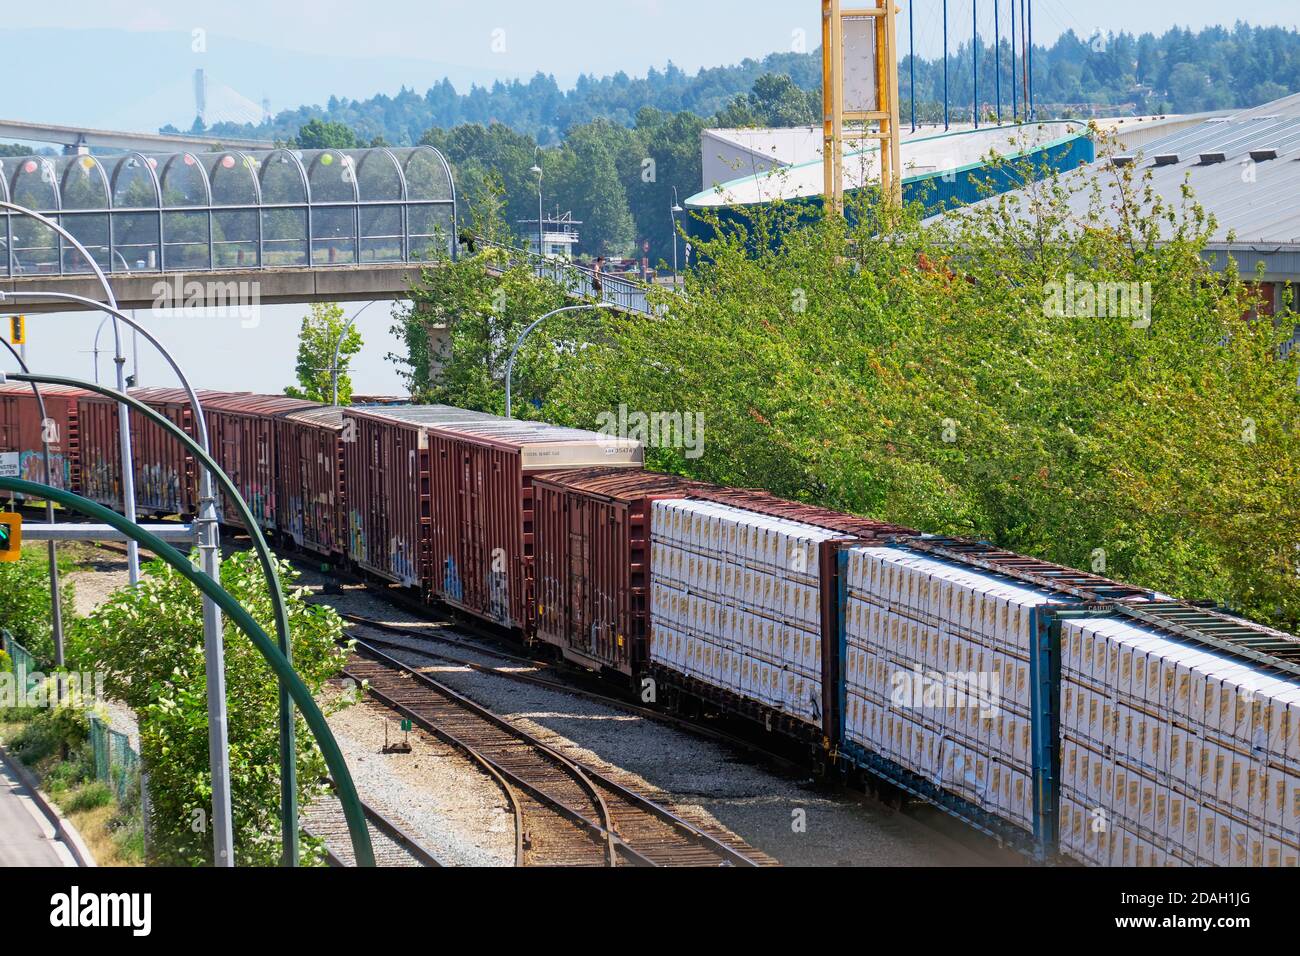 Freight train rumbling down the tracks through a business section of New Westminster, B. C., Canada. Stock Photo